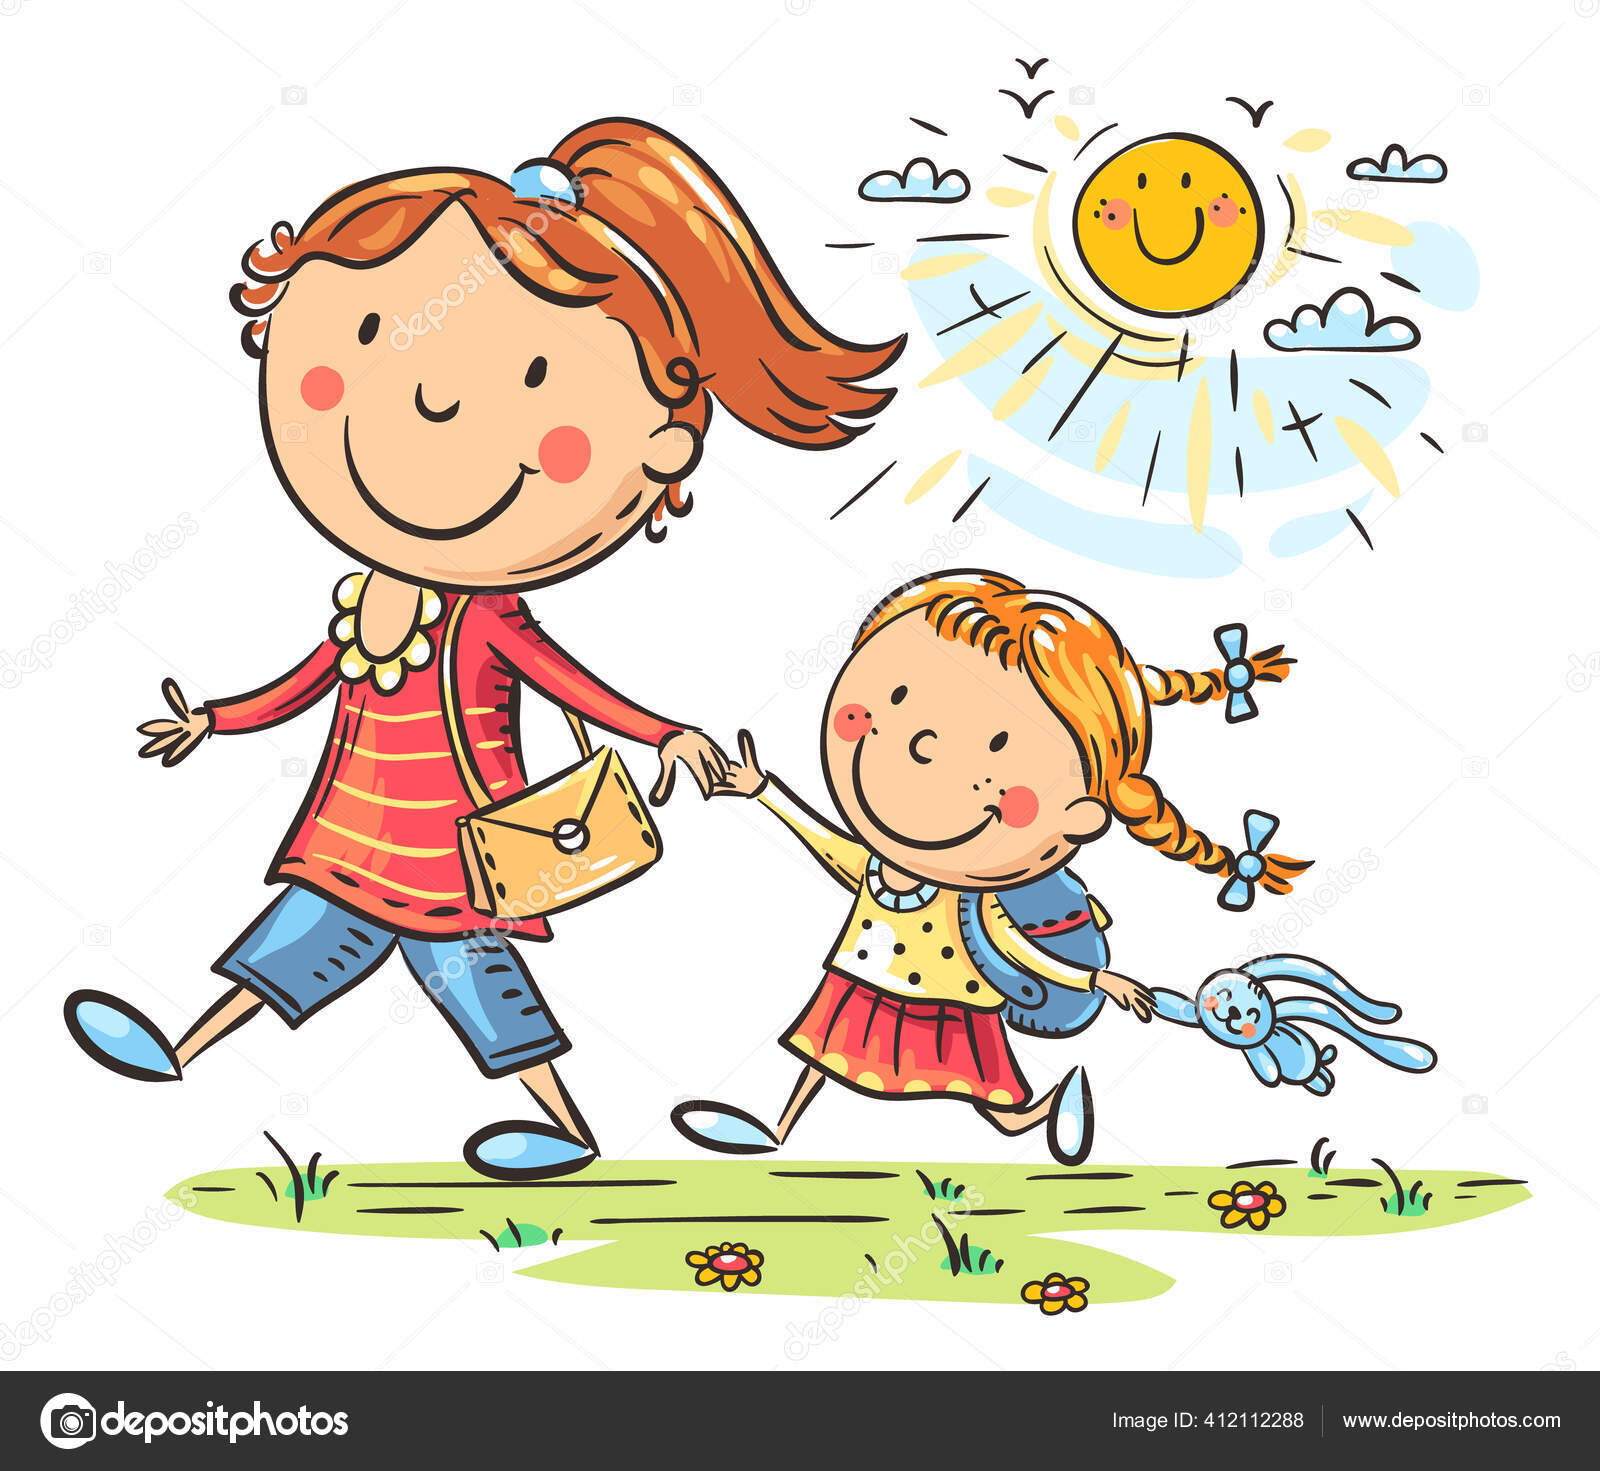 parent　©Katerina_Dav　to　daughter　Mother　child　the　walking　way　412112288　Vector　and　and　outdoors　Stock　by　on　kindergarten,